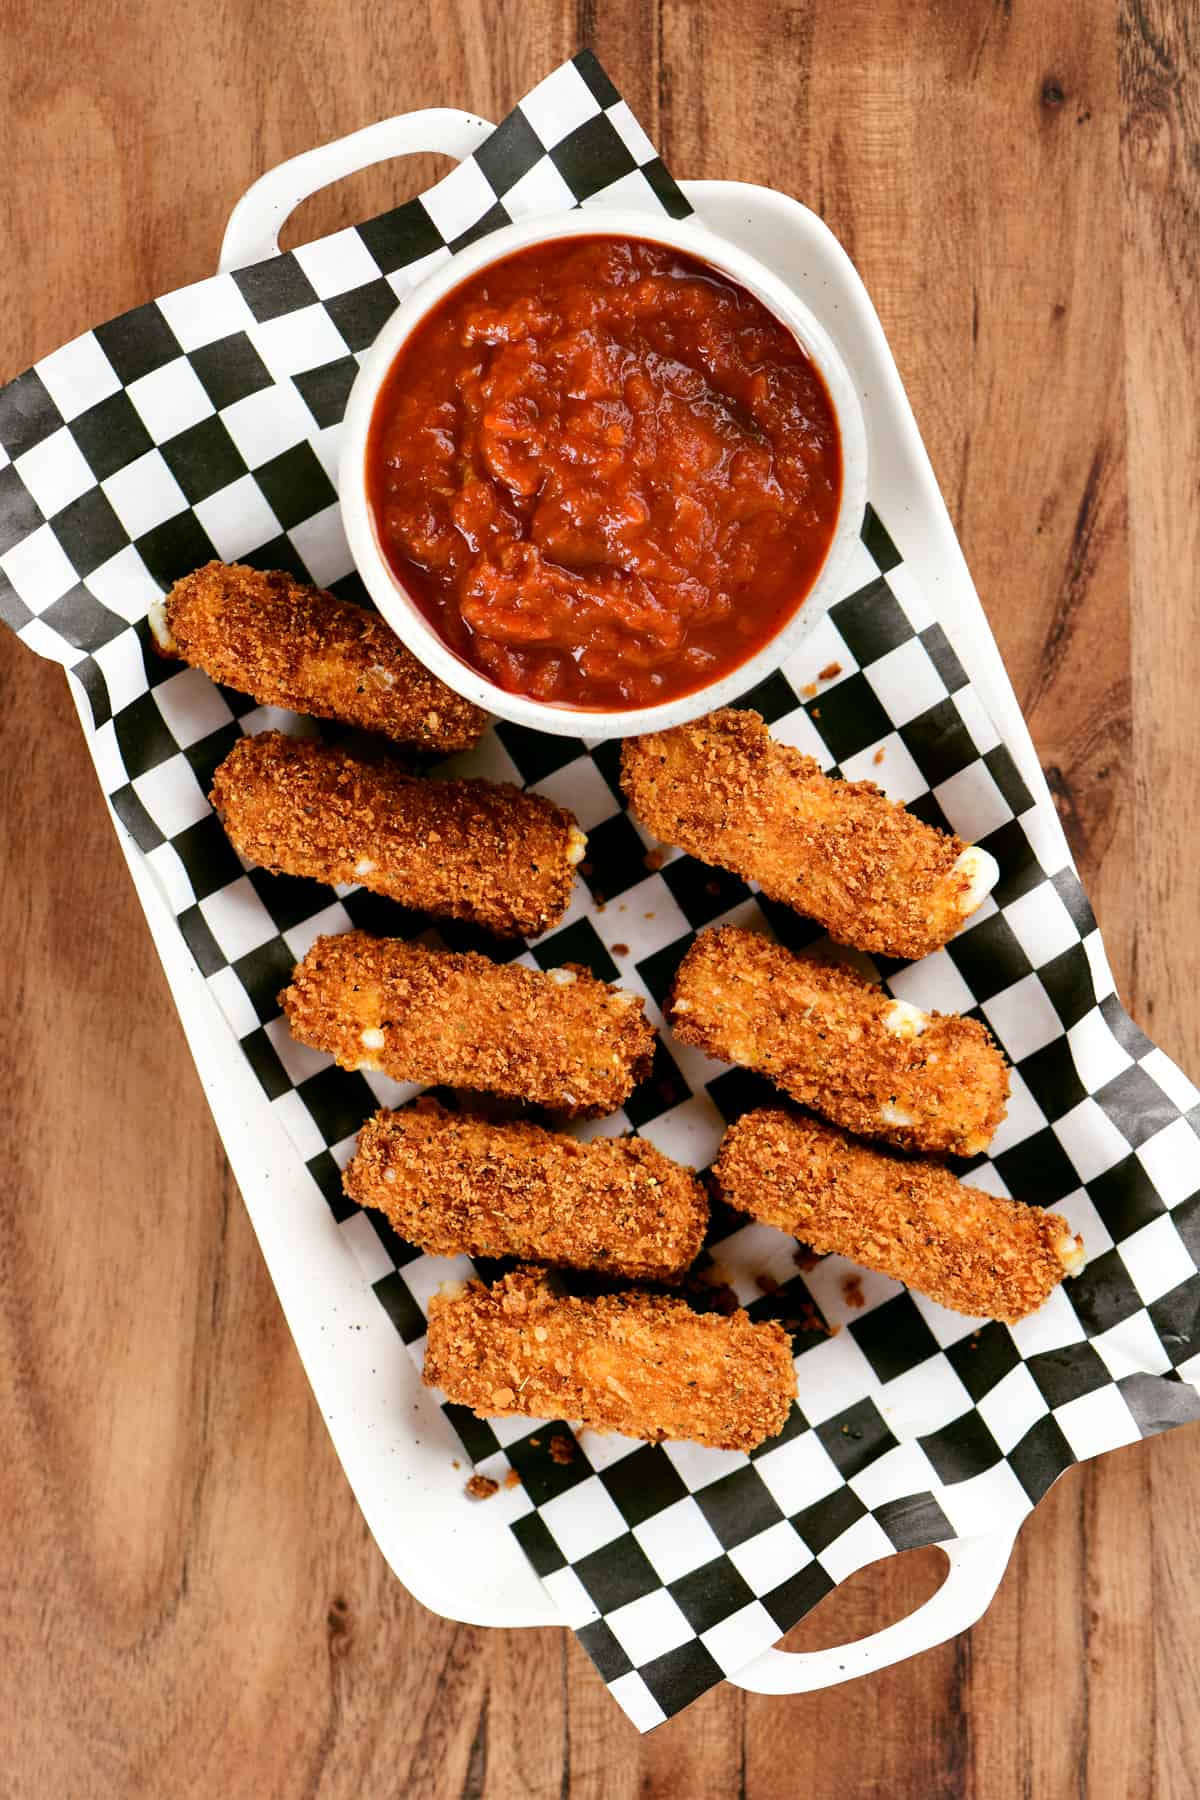 eight mozzarella sticks and some red sauce on a platter.